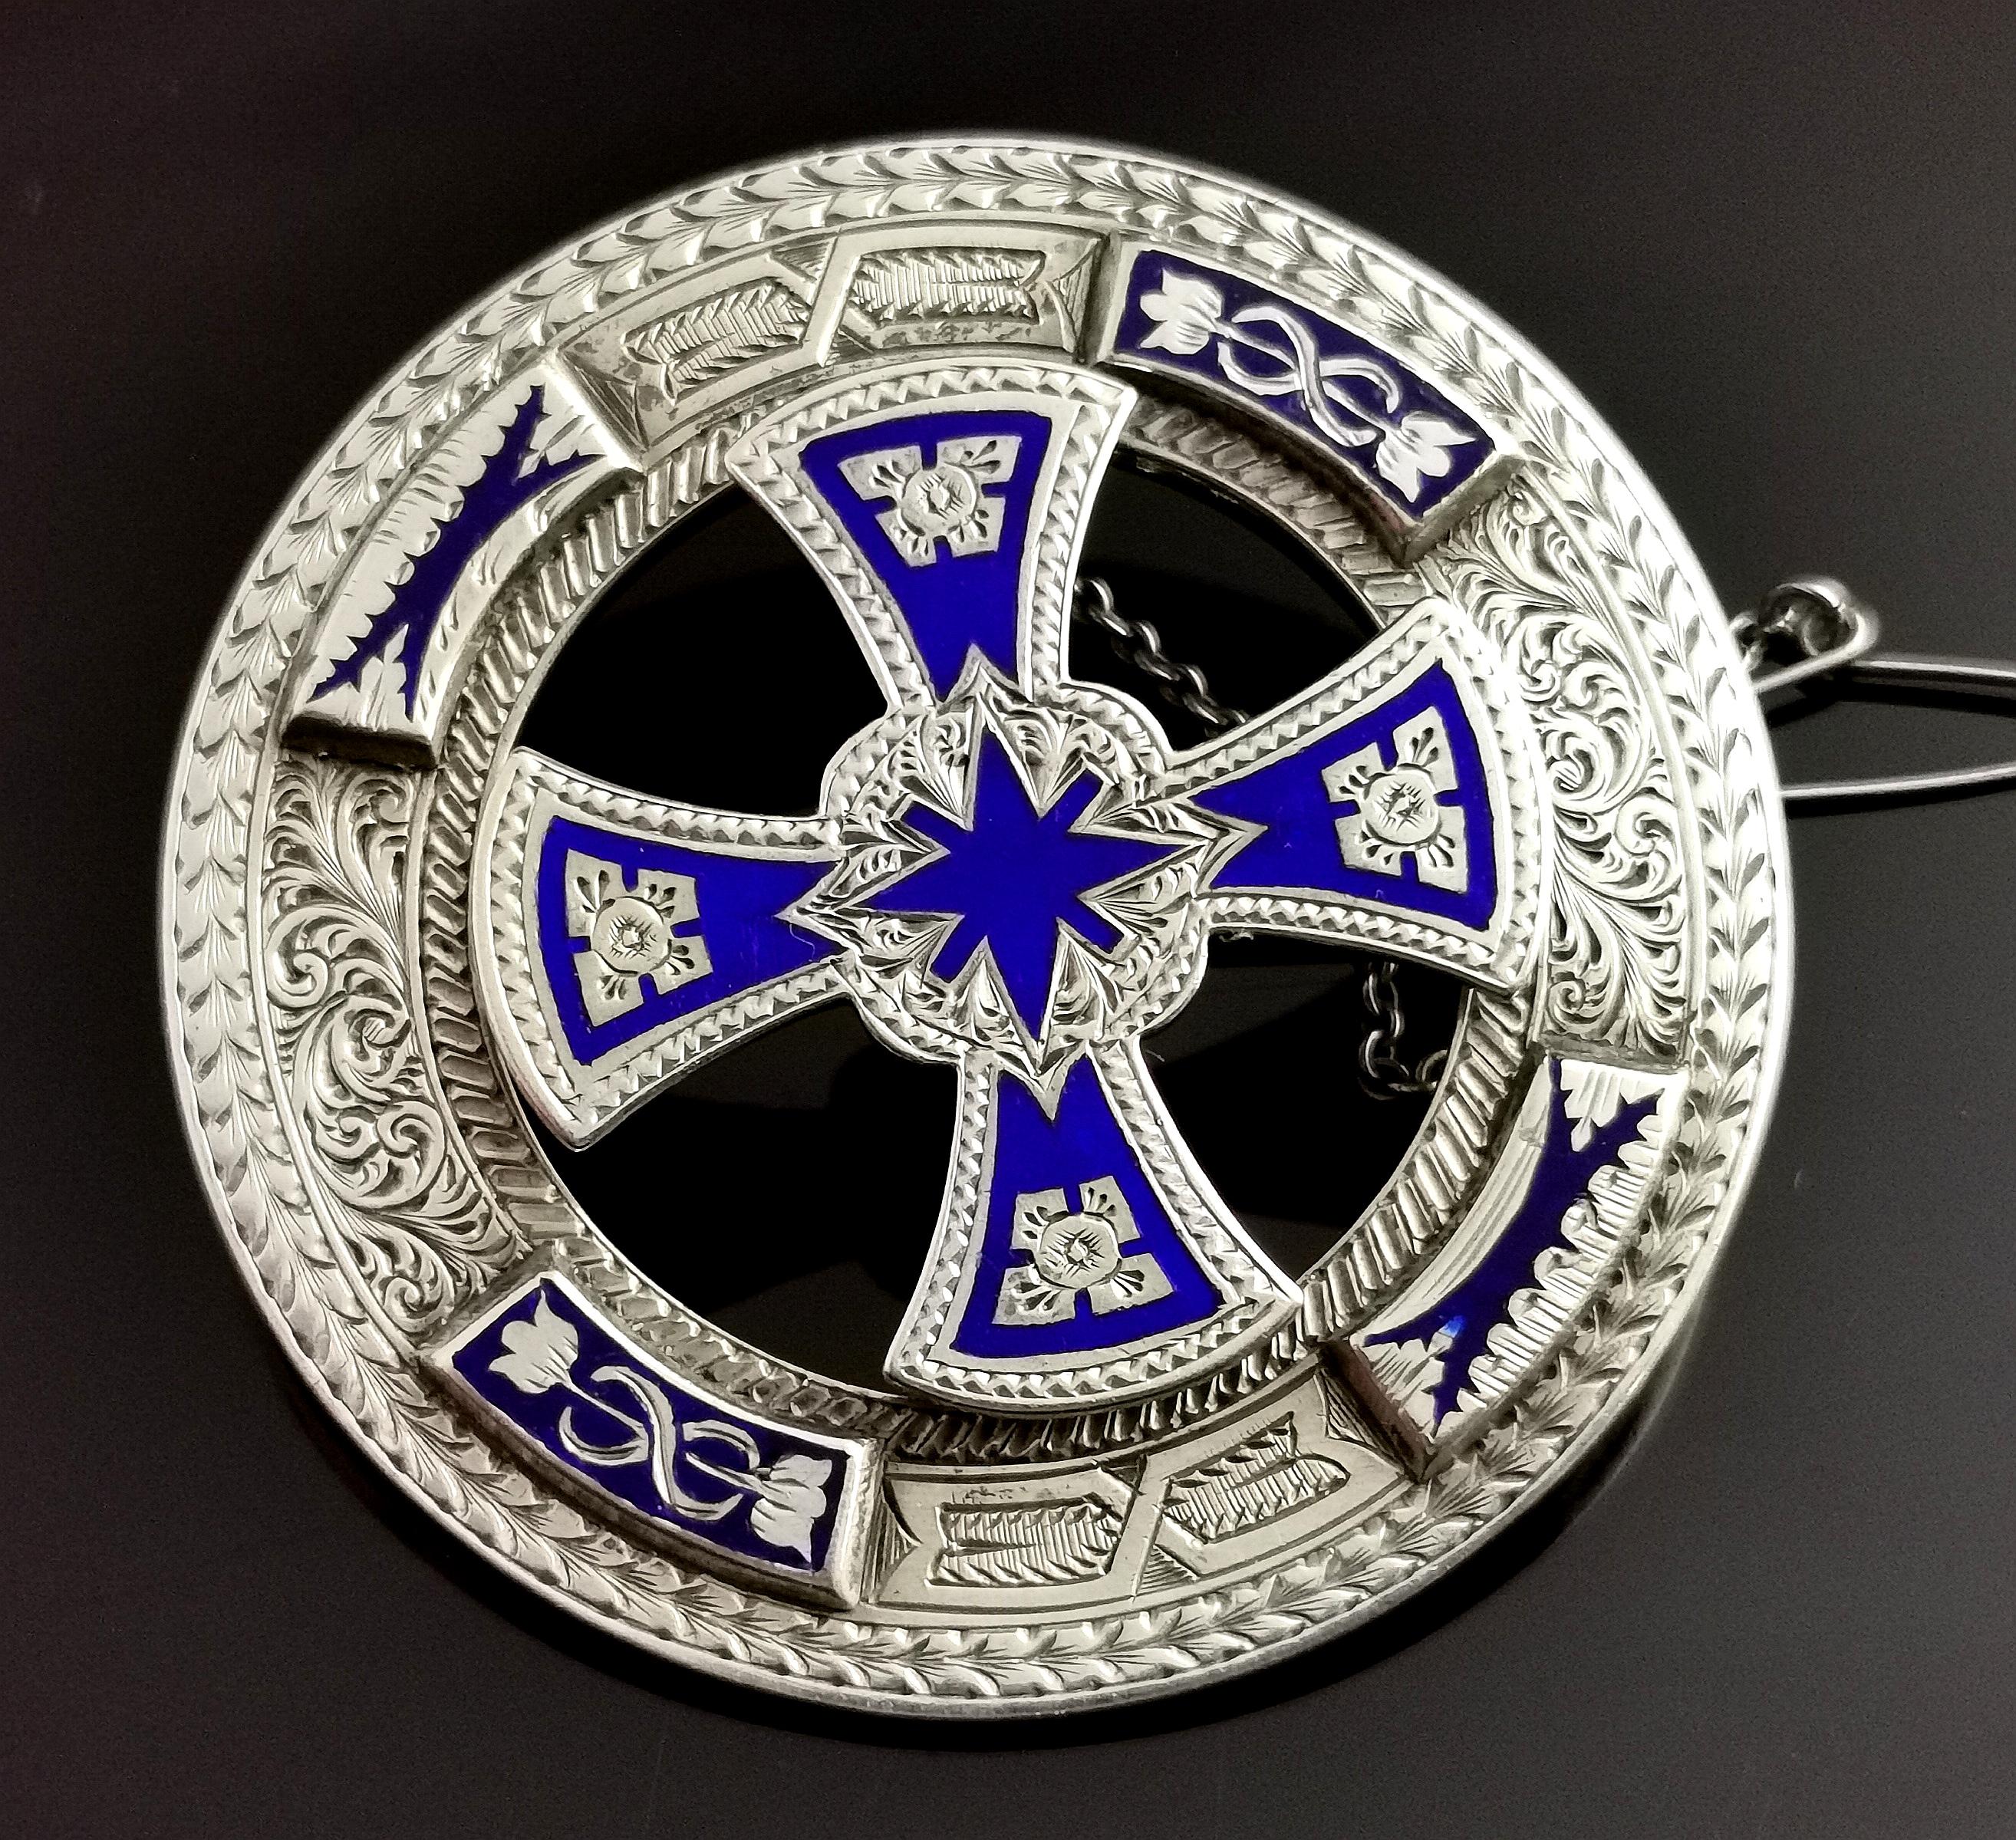 A beautiful and highly detailed antique Scottish sterling silver and cobalt blue enamel brooch or kilt pin.

It is a large sized brooch, circular in shape with a mounted celtic Cross to the centre.

It is heavily engraved all over and has four